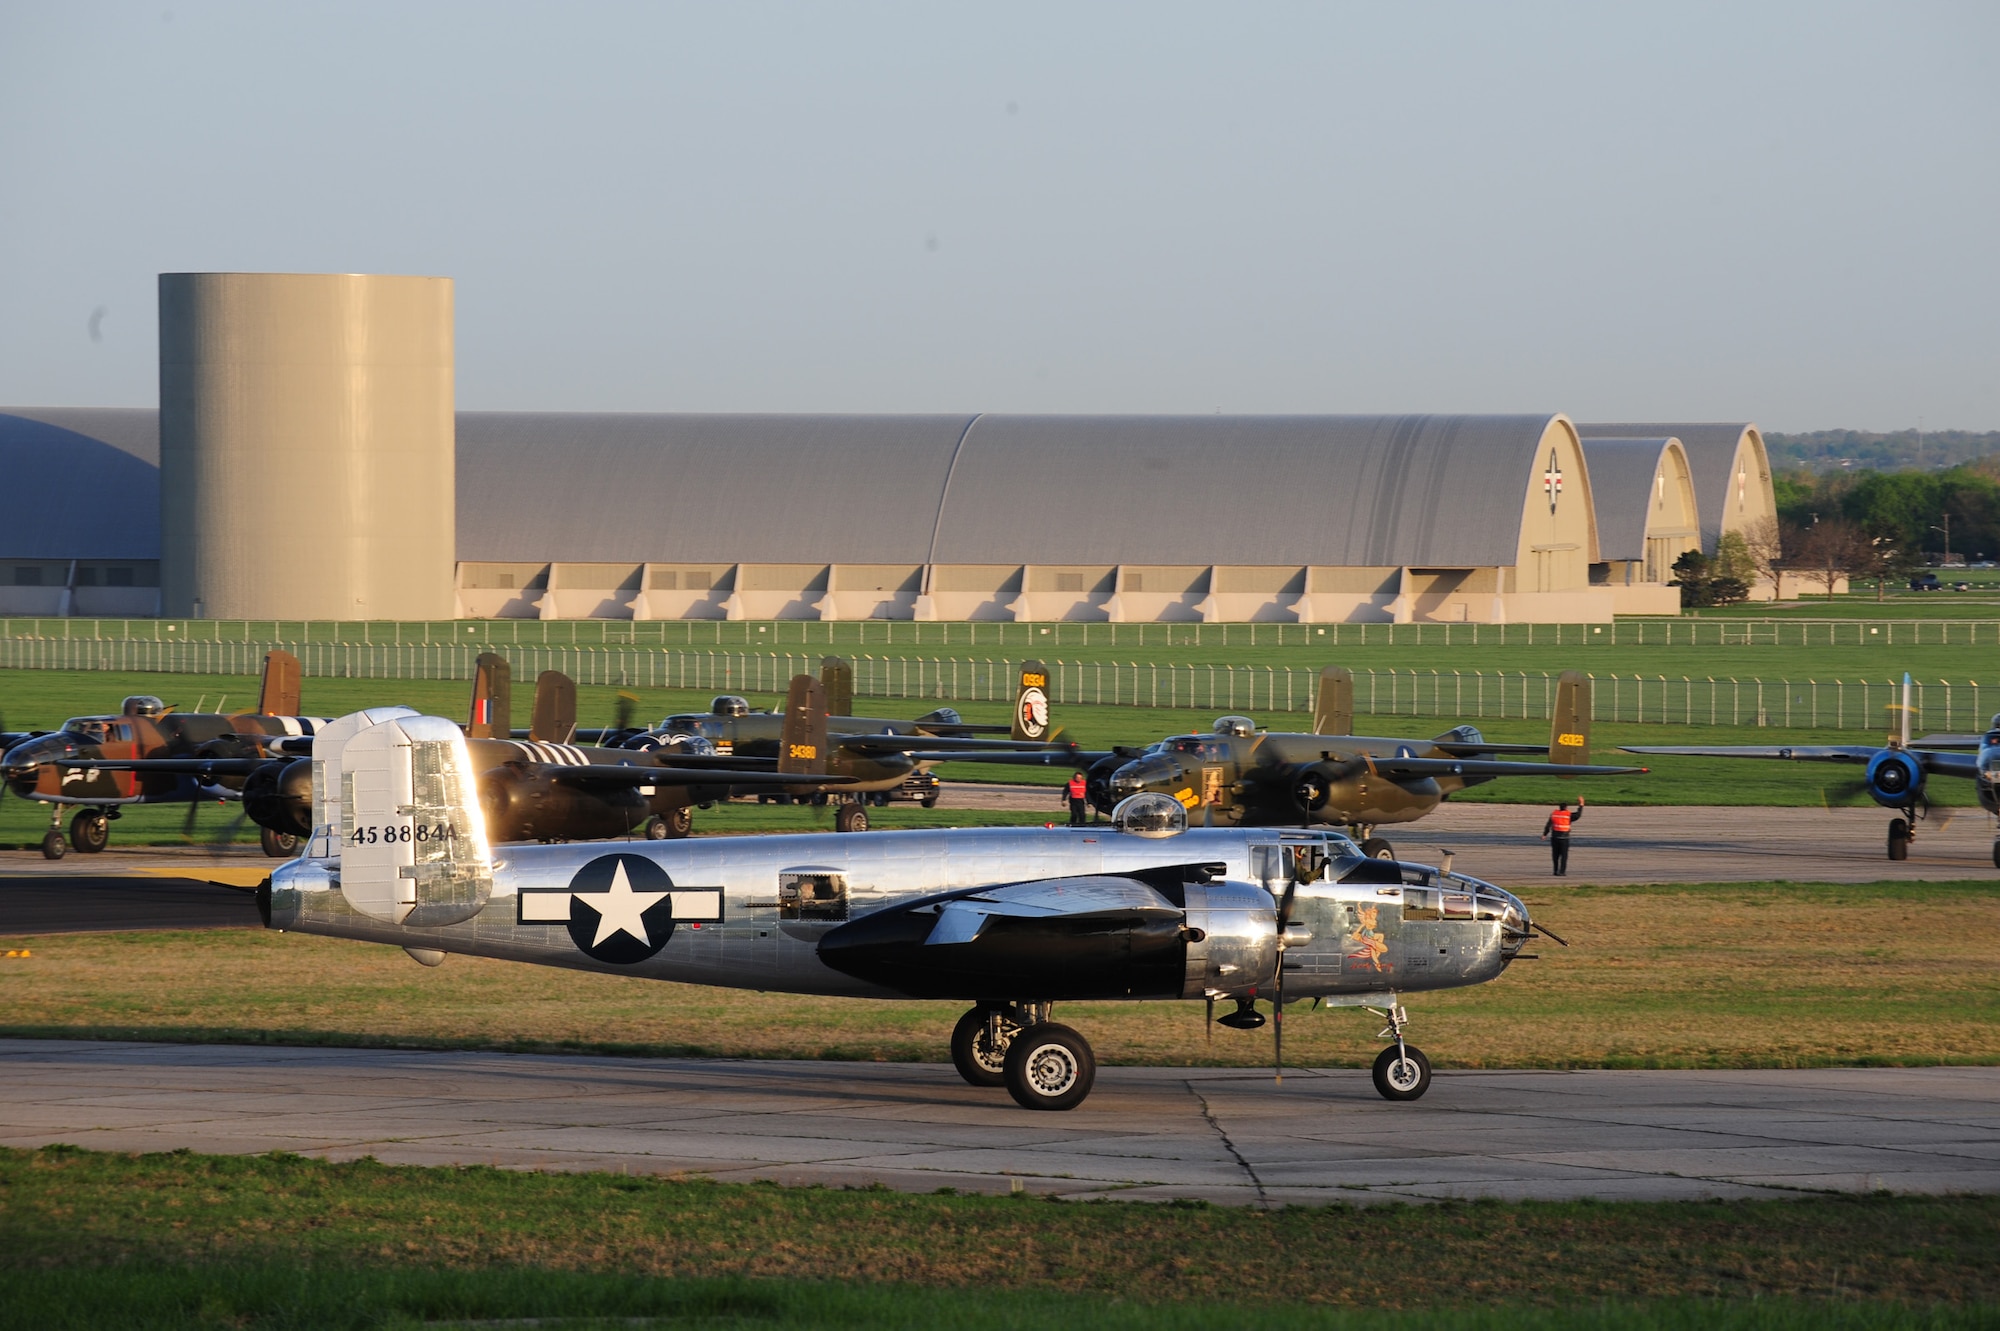 Vintage B-25 Mitchell aircraft arrive at the National Museum of the U.S. Air Force at Wright Patterson Air Force Base, Ohio, to take part in events honoring the 68th Doolittle Raiders' reunion, April 17, 2010. The event commemorates the anniversary of the Doolittle Tokyo Raid when on April 18, 1942, U.S. Army Air Forces Lt. Col. Jimmy Doolittle's squad of 16 B-25s bombed targets in response to the Japanese attack on Pearl Harbor. (U.S. Air Force photo/Tech. Sgt. Jacob N. Bailey)
